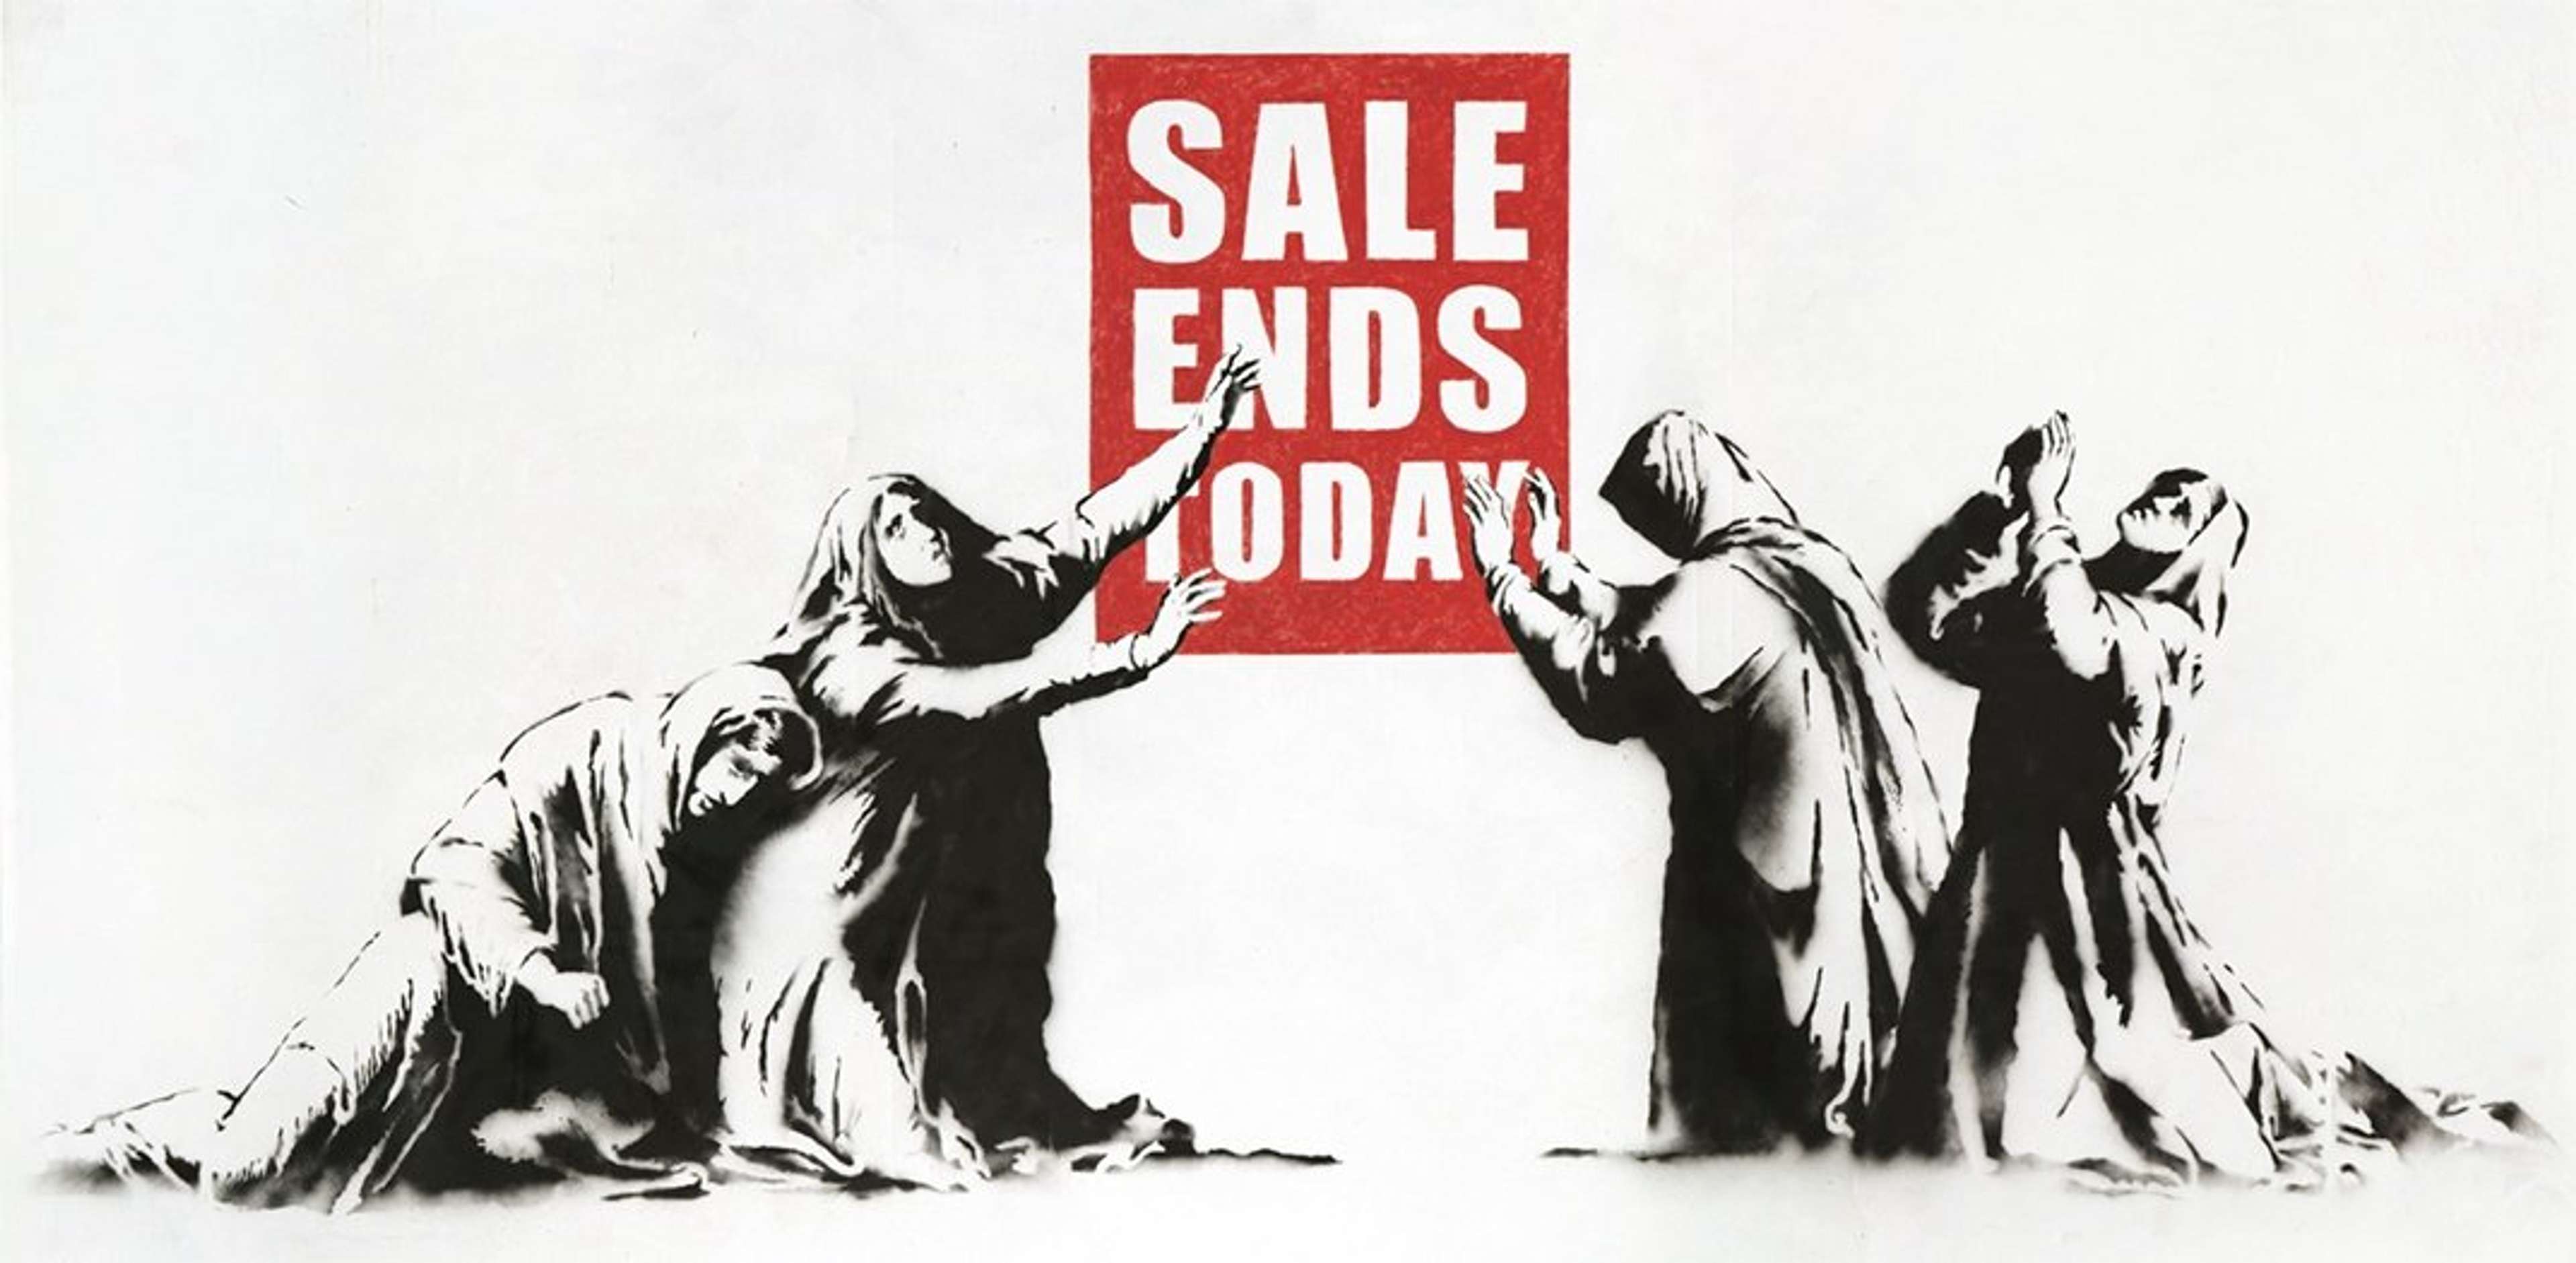 Sale Ends Today by Banksy